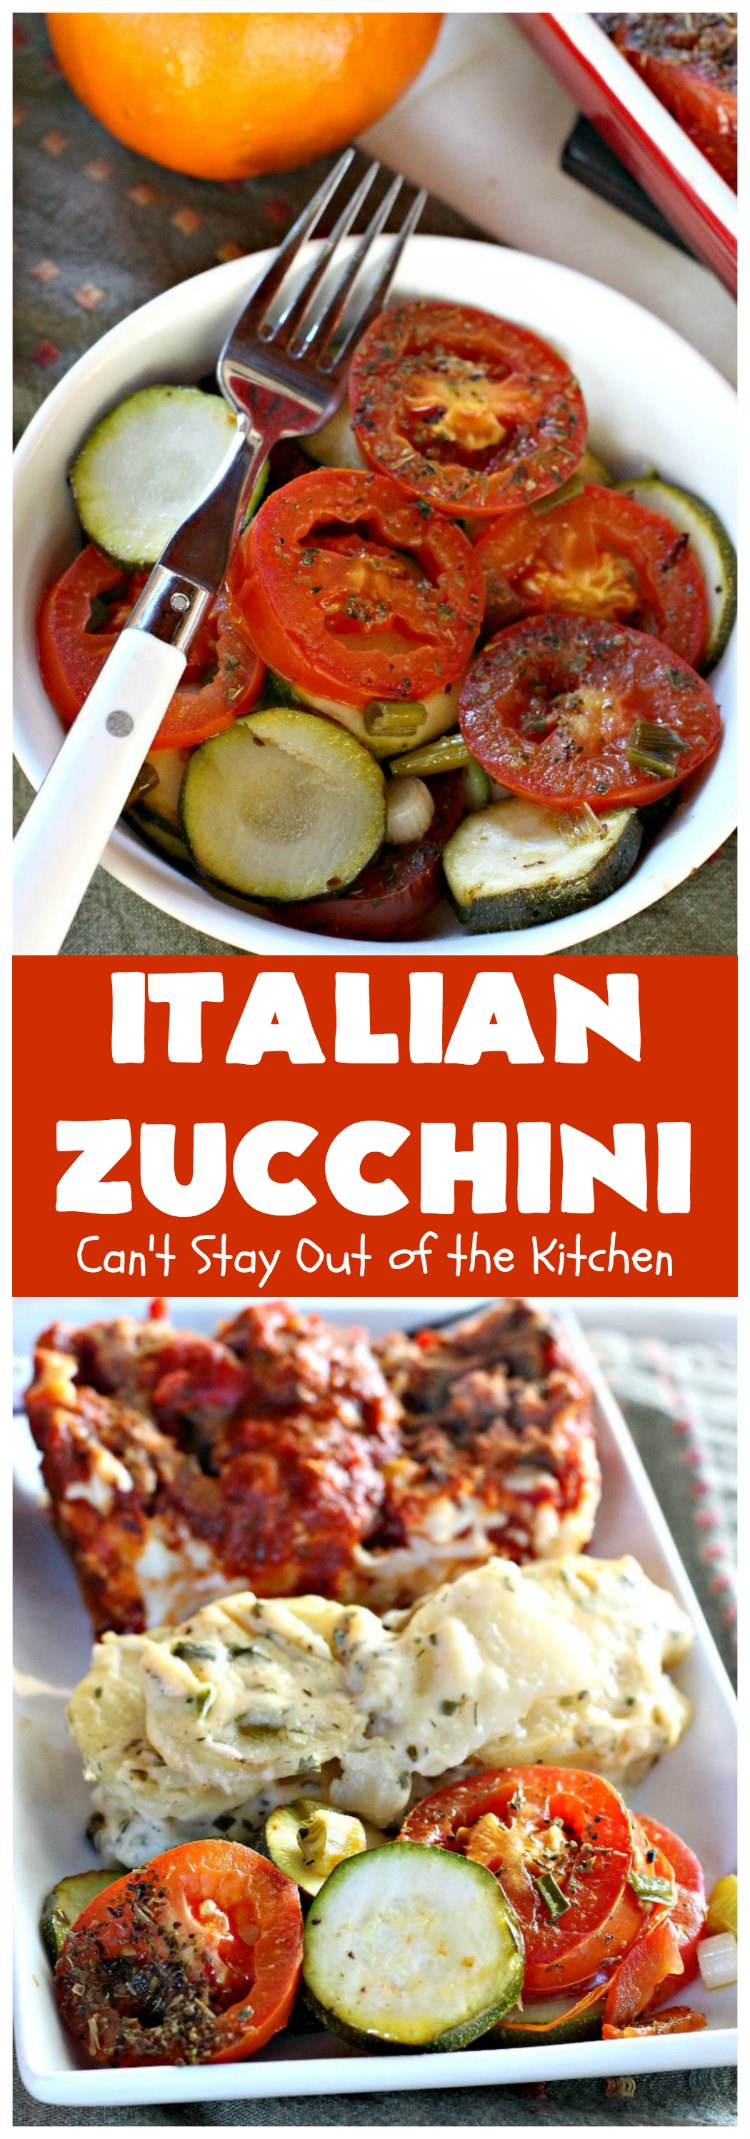 Italian Zucchini | Can't Stay Out of the Kitchen